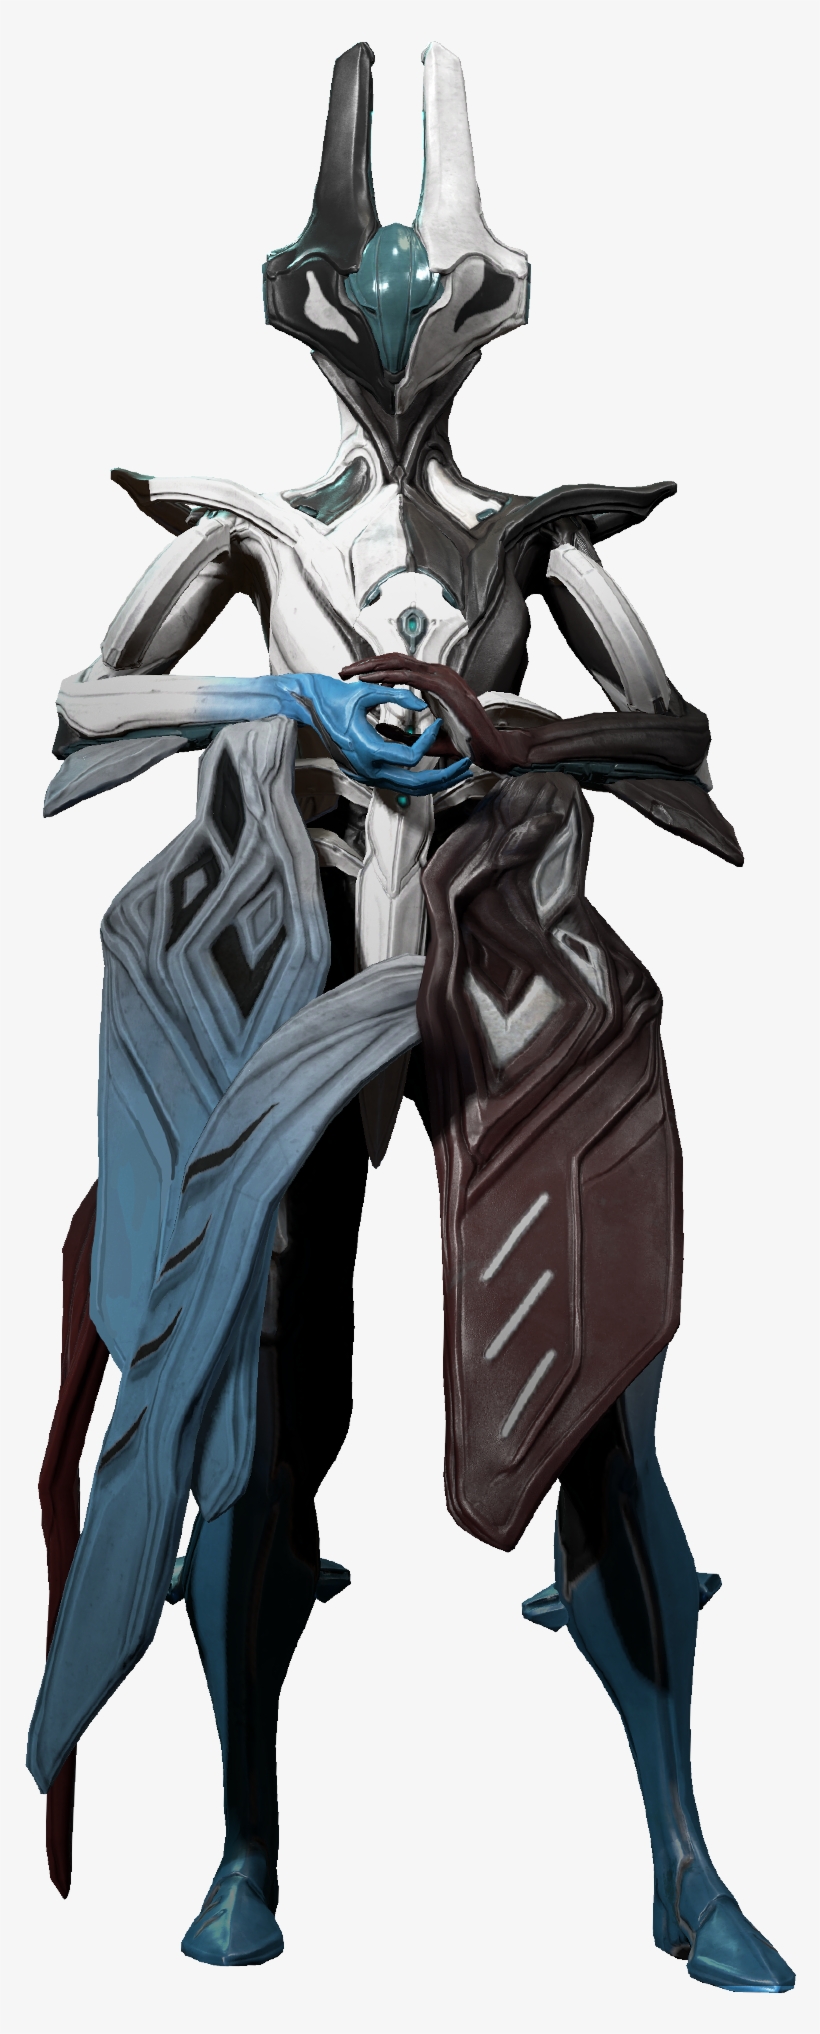 Equinox Is The Living Embodiment Of Warframe Duality - Equinox Warframe, transparent png #2189646